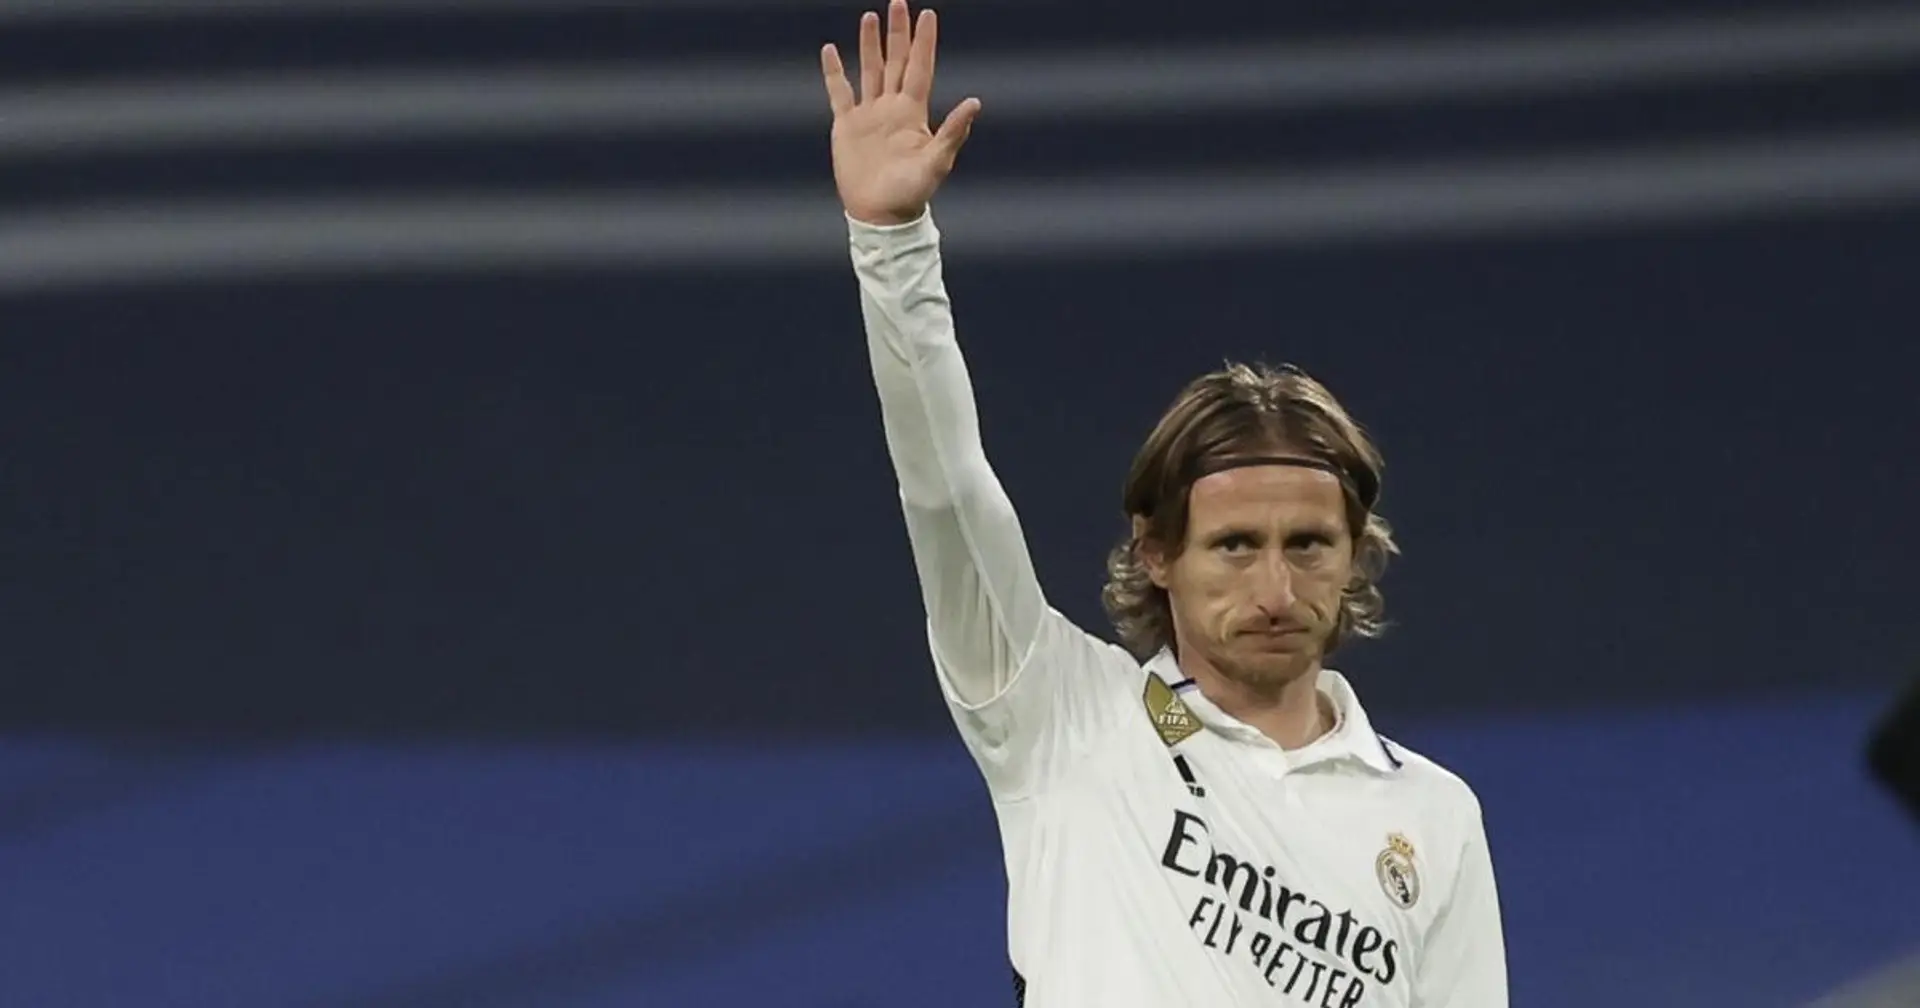 Revealed: Luka Modric's potential next career move after 12 years at Real Madrid